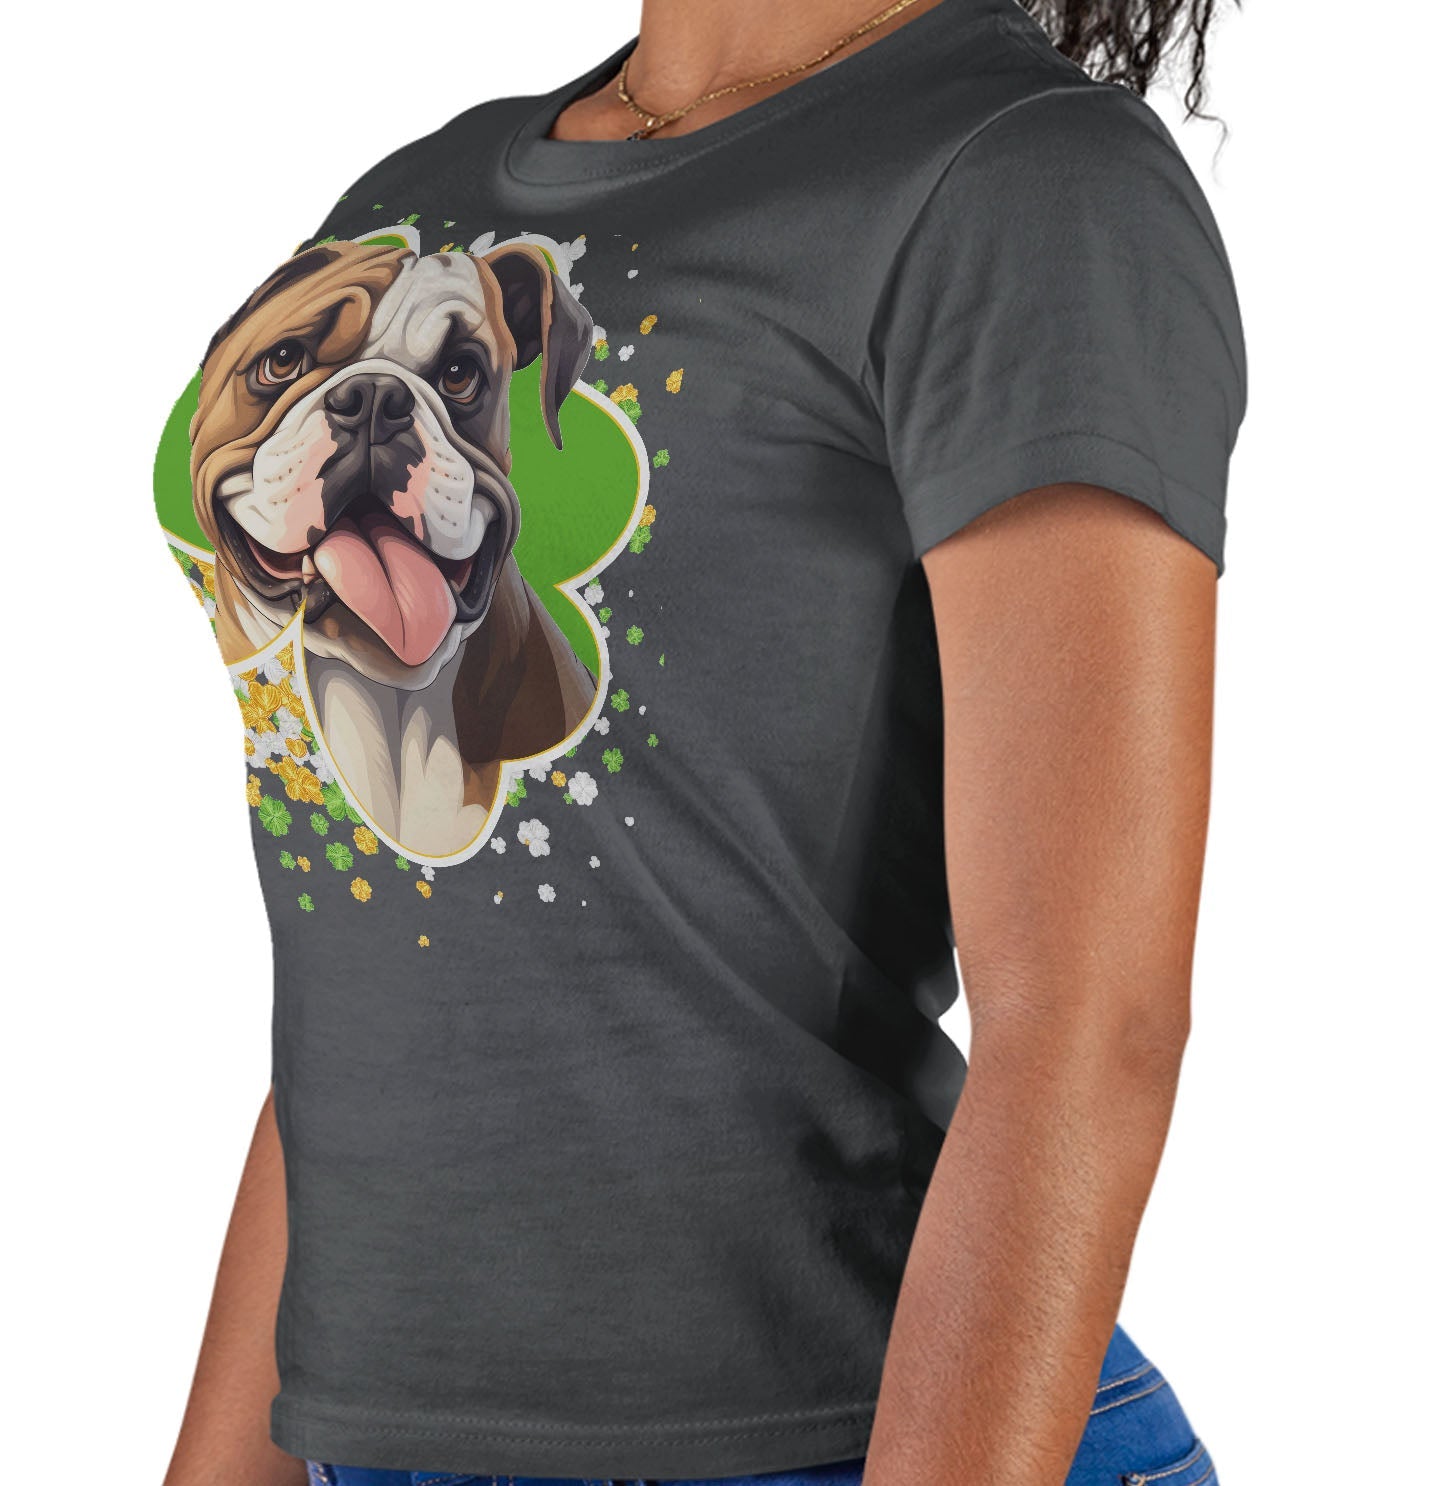 Big Clover St. Patrick's Day Bulldog - Women's Fitted T-Shirt